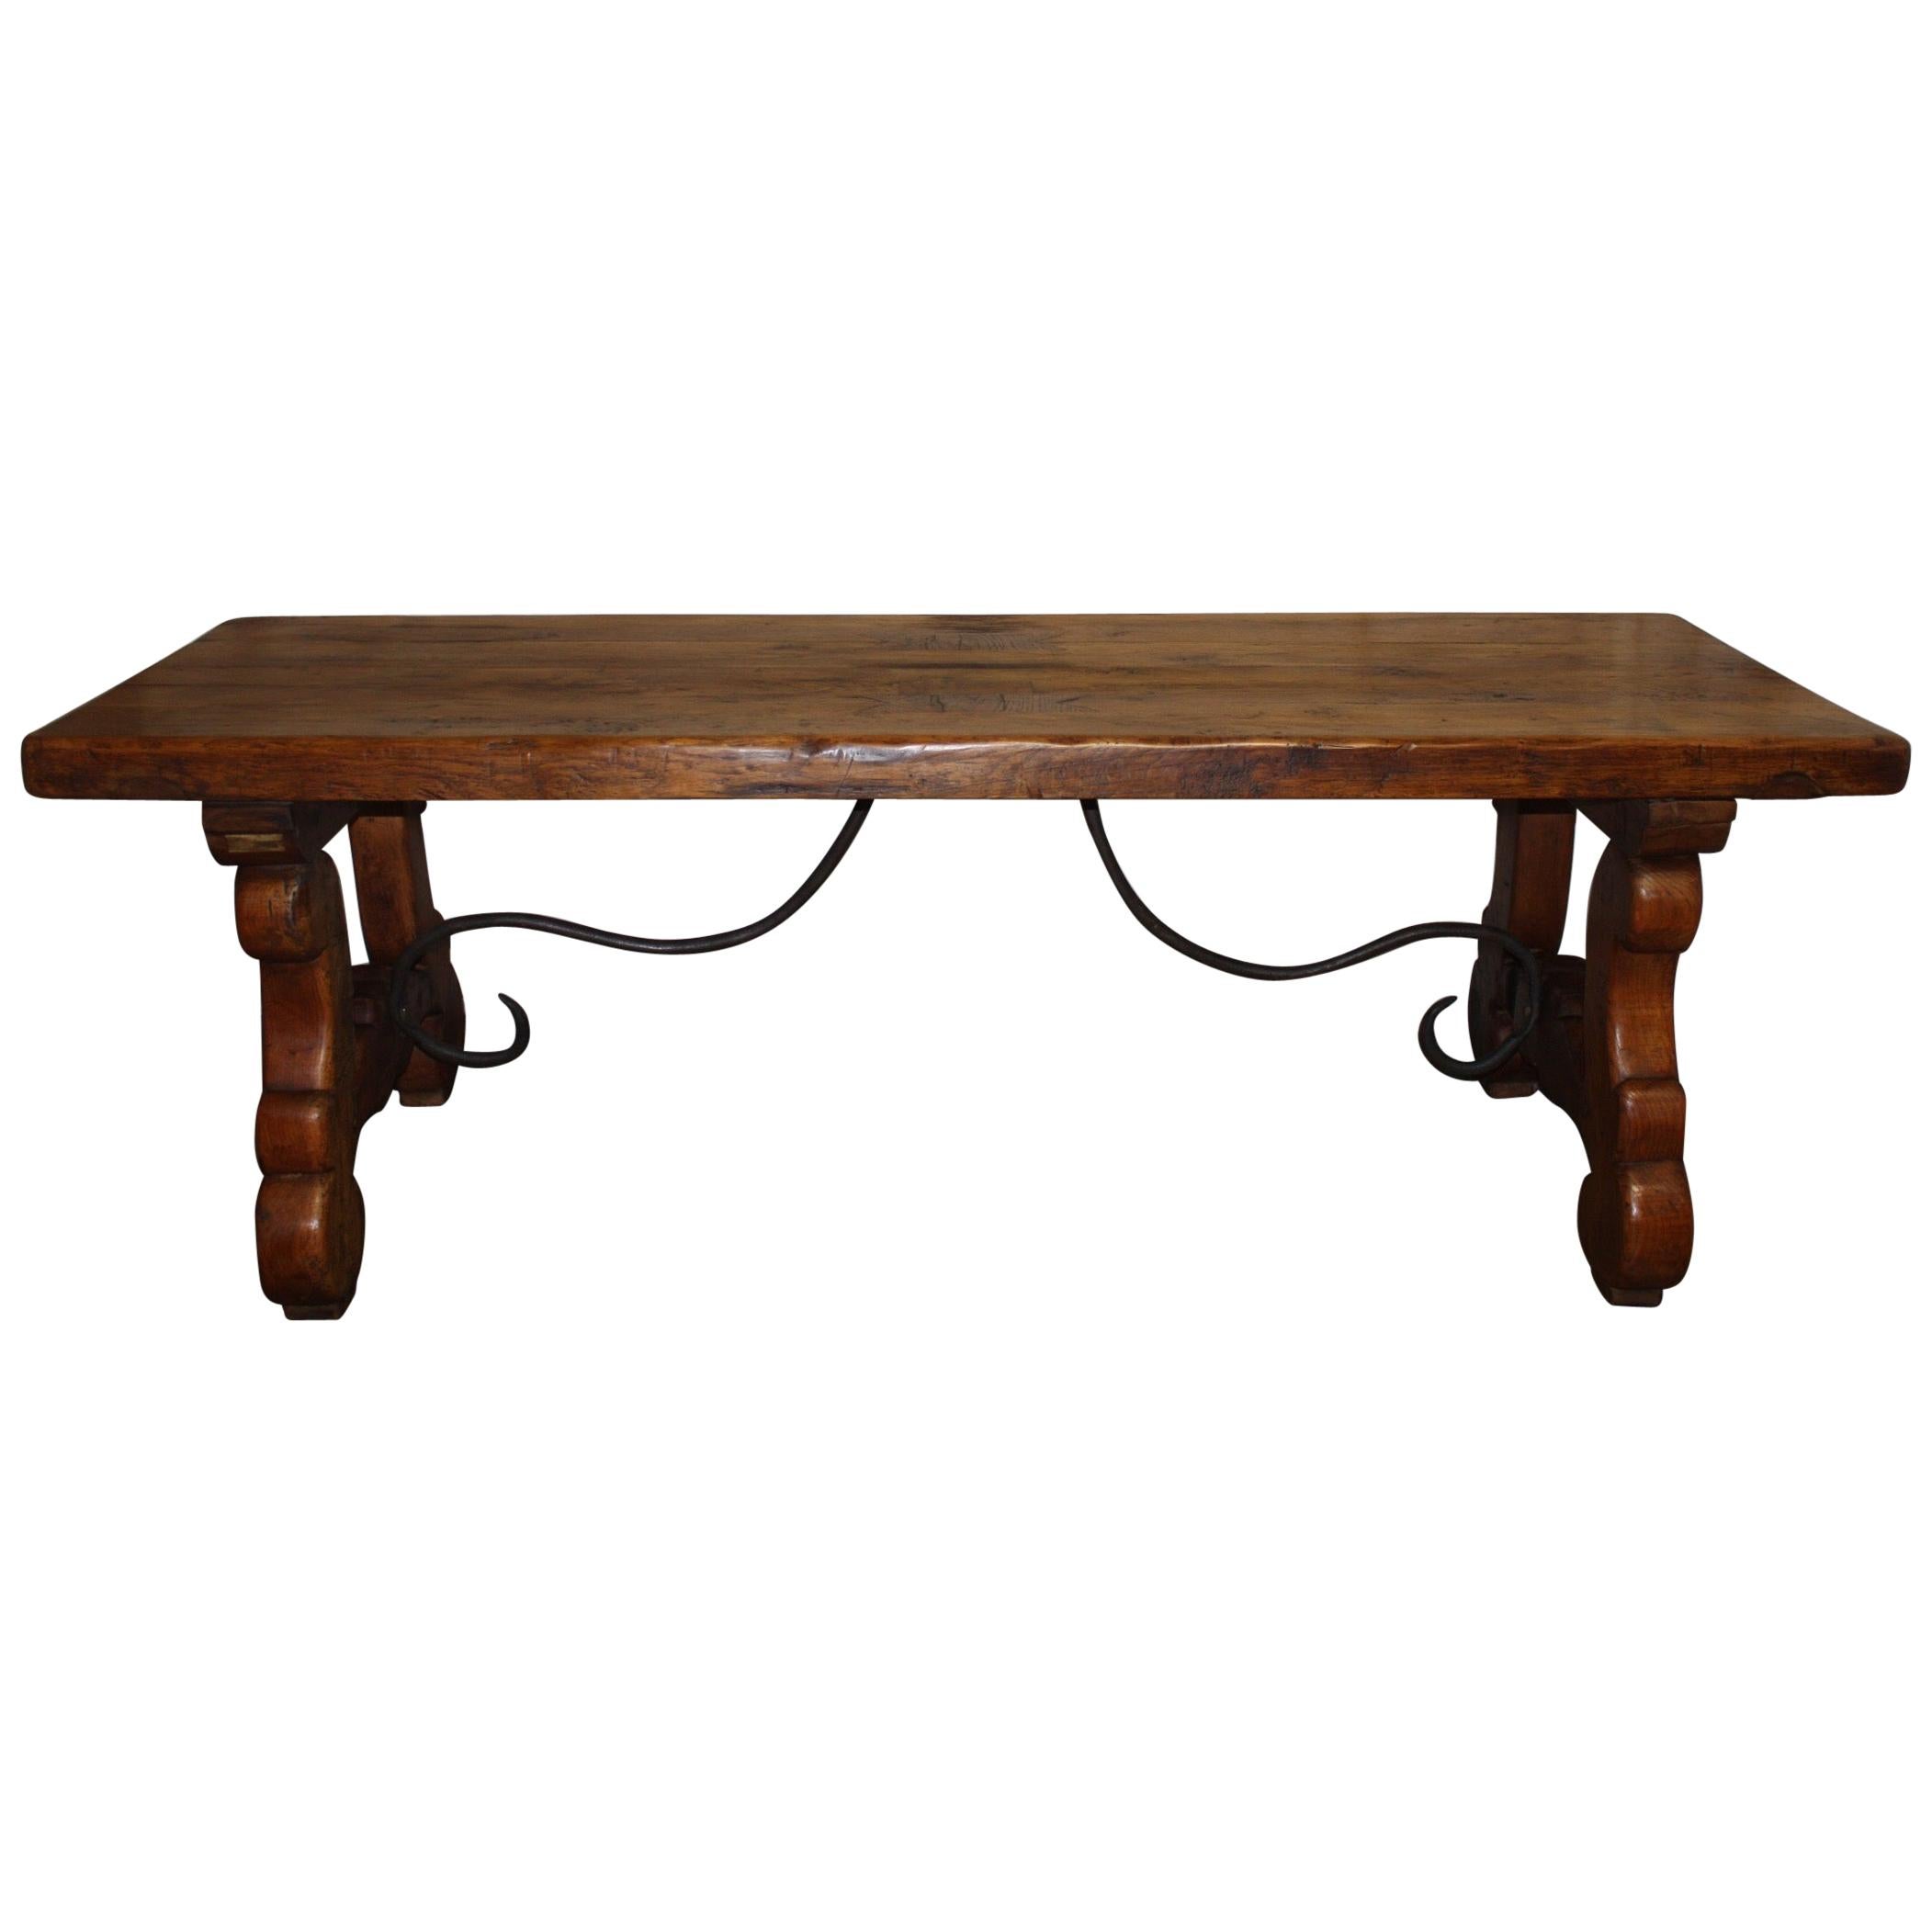 French Early 18th Century Trestle Table